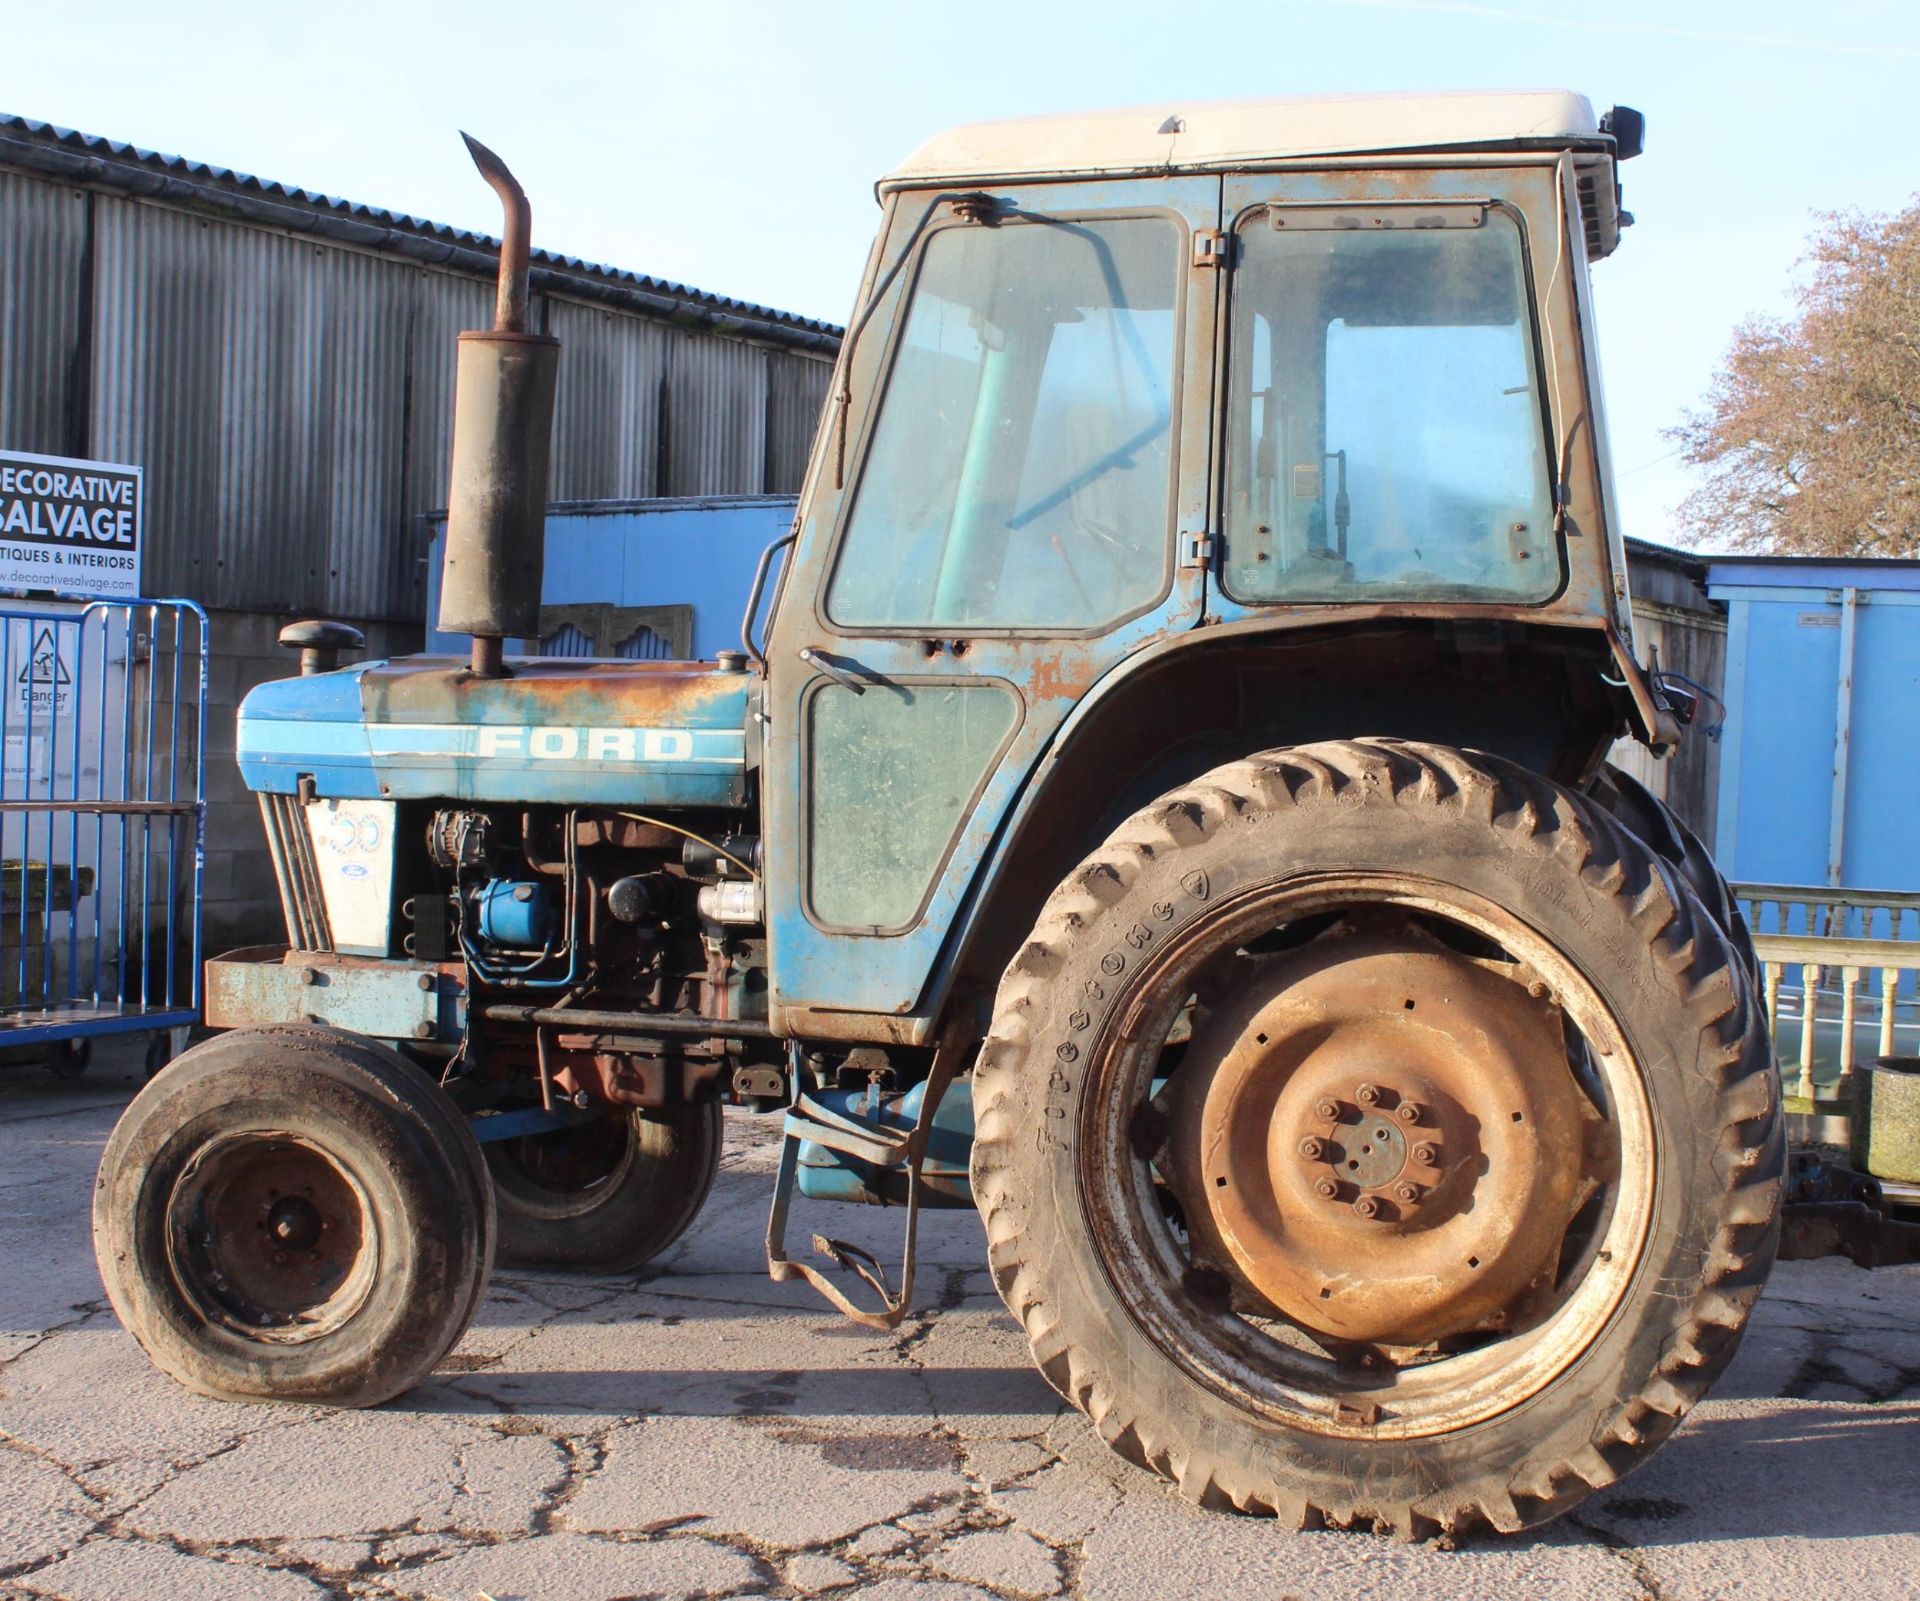 A FORD 6610 2 WHEEL DRIVE TRACTOR B287 YMA FIRST REG 04/01/85 WITH LOG BOOK WITH SPARE REAR - Image 2 of 5